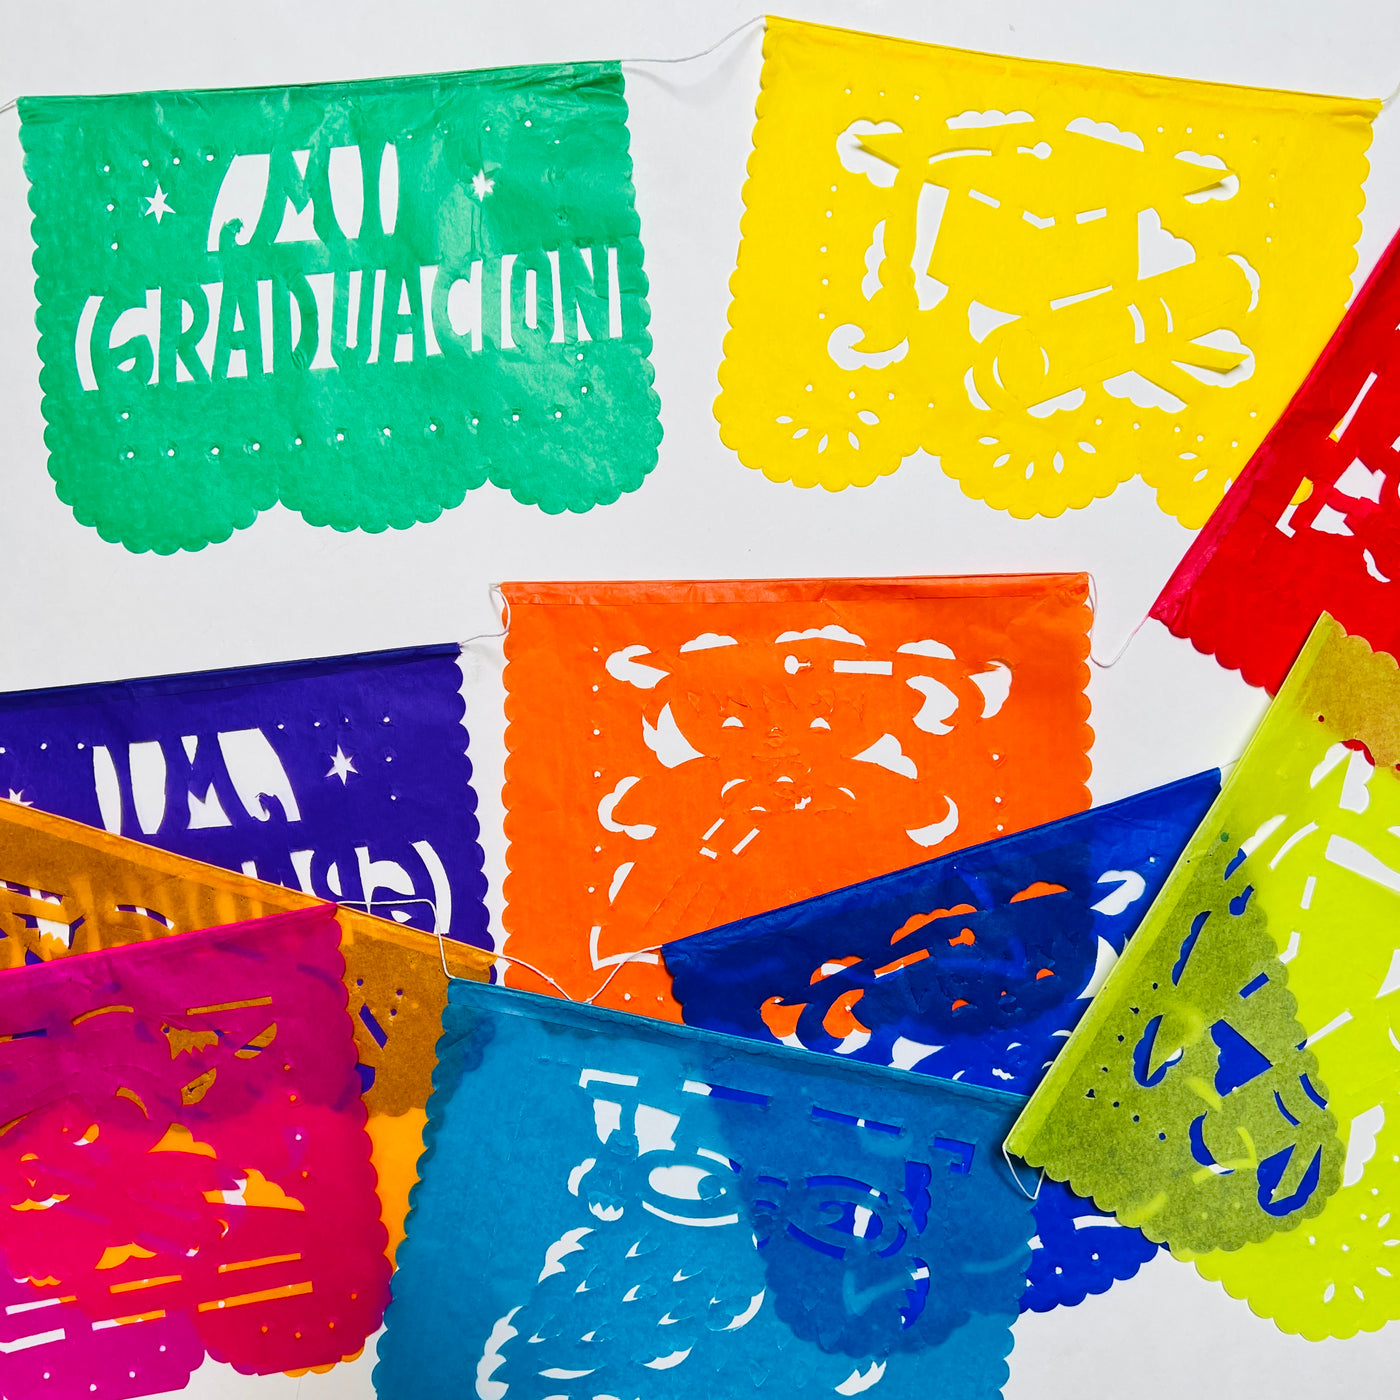 Mi Graduacion (My Graduation) papel picado banner of various colors and various grad related designs. Papel picado , or perforated paper, is a traditional Mexican decorative craft made by cutting elaborate designs into sheets of tissue paper.